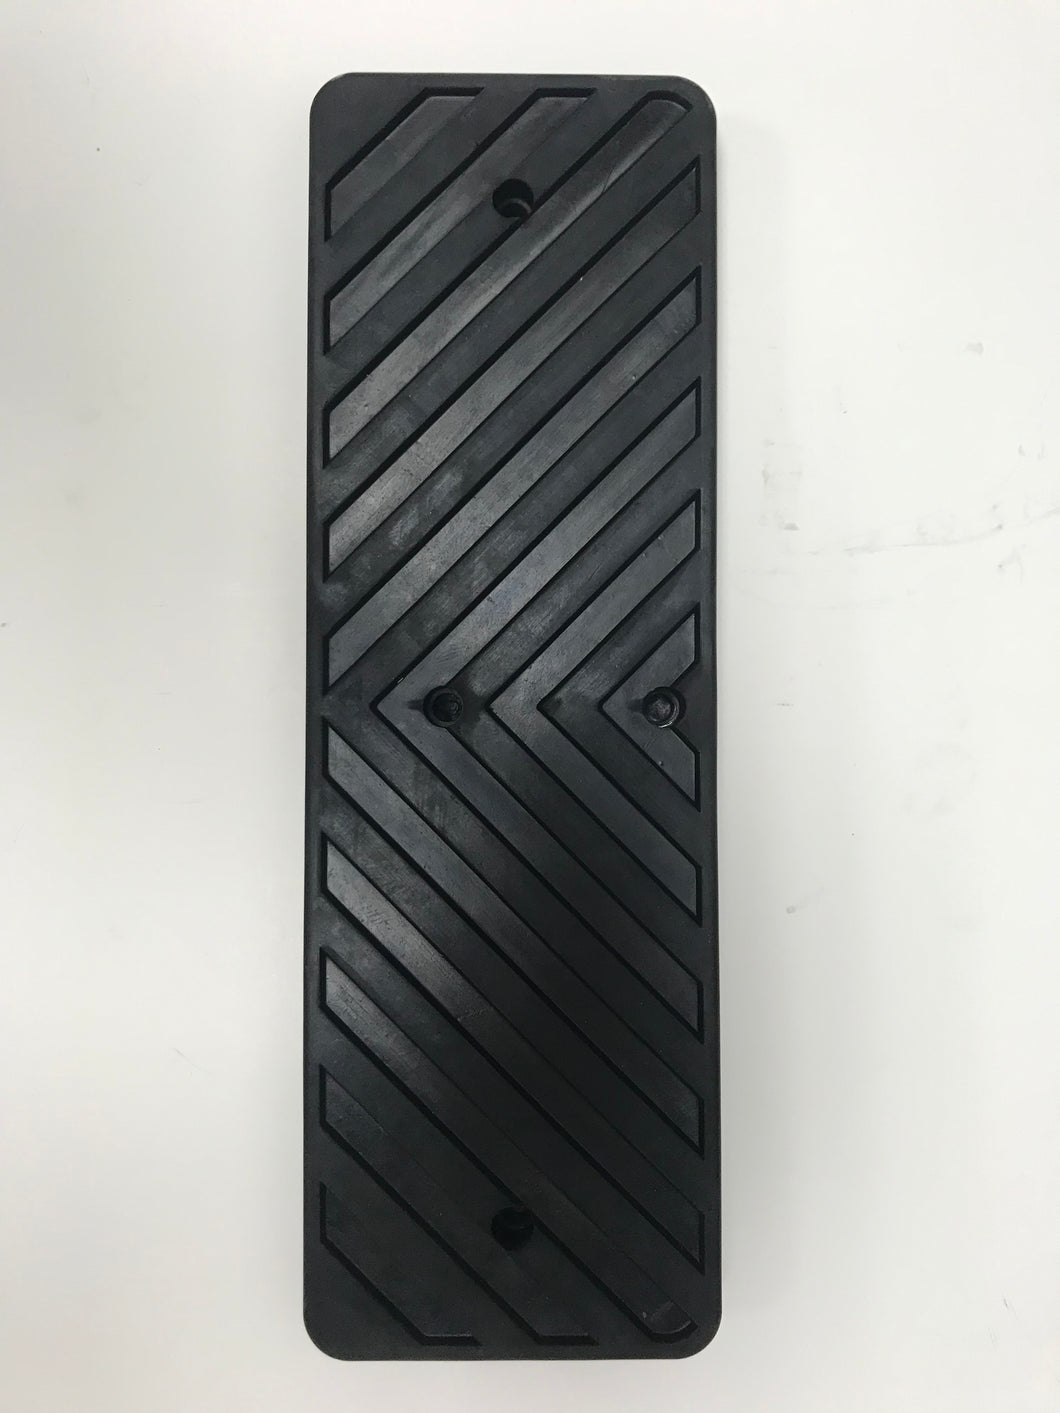 Rubber Pad-TDTC-RP301 | For Tire Changer LT-3460/3710/3900/3950/3980